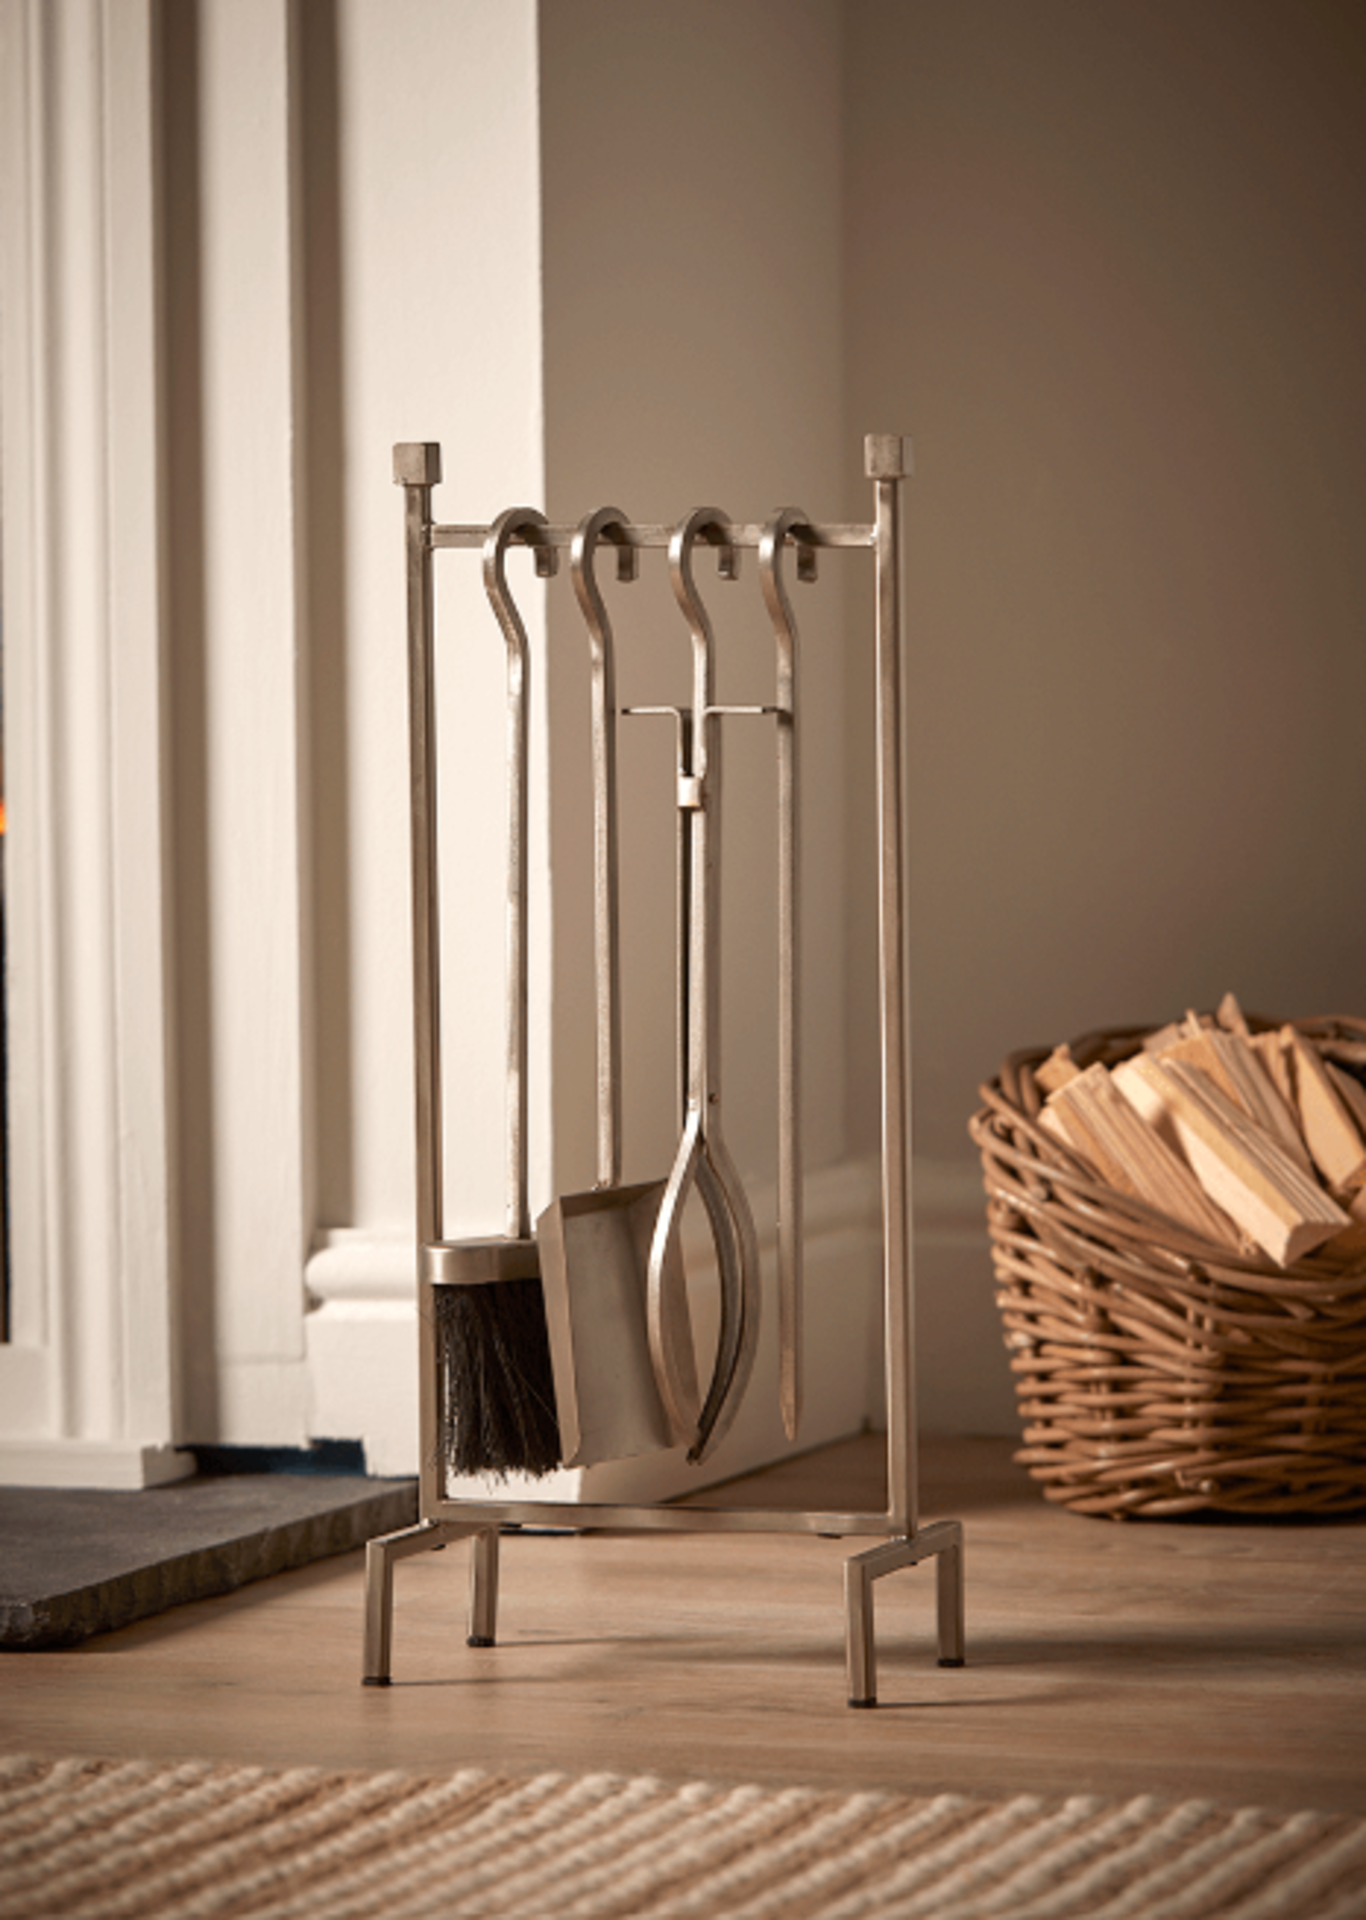 Cox & Cox Iron Hanging Fireside Set - Silver. RRP £100.00. With poker, shovel, tongs and brush,